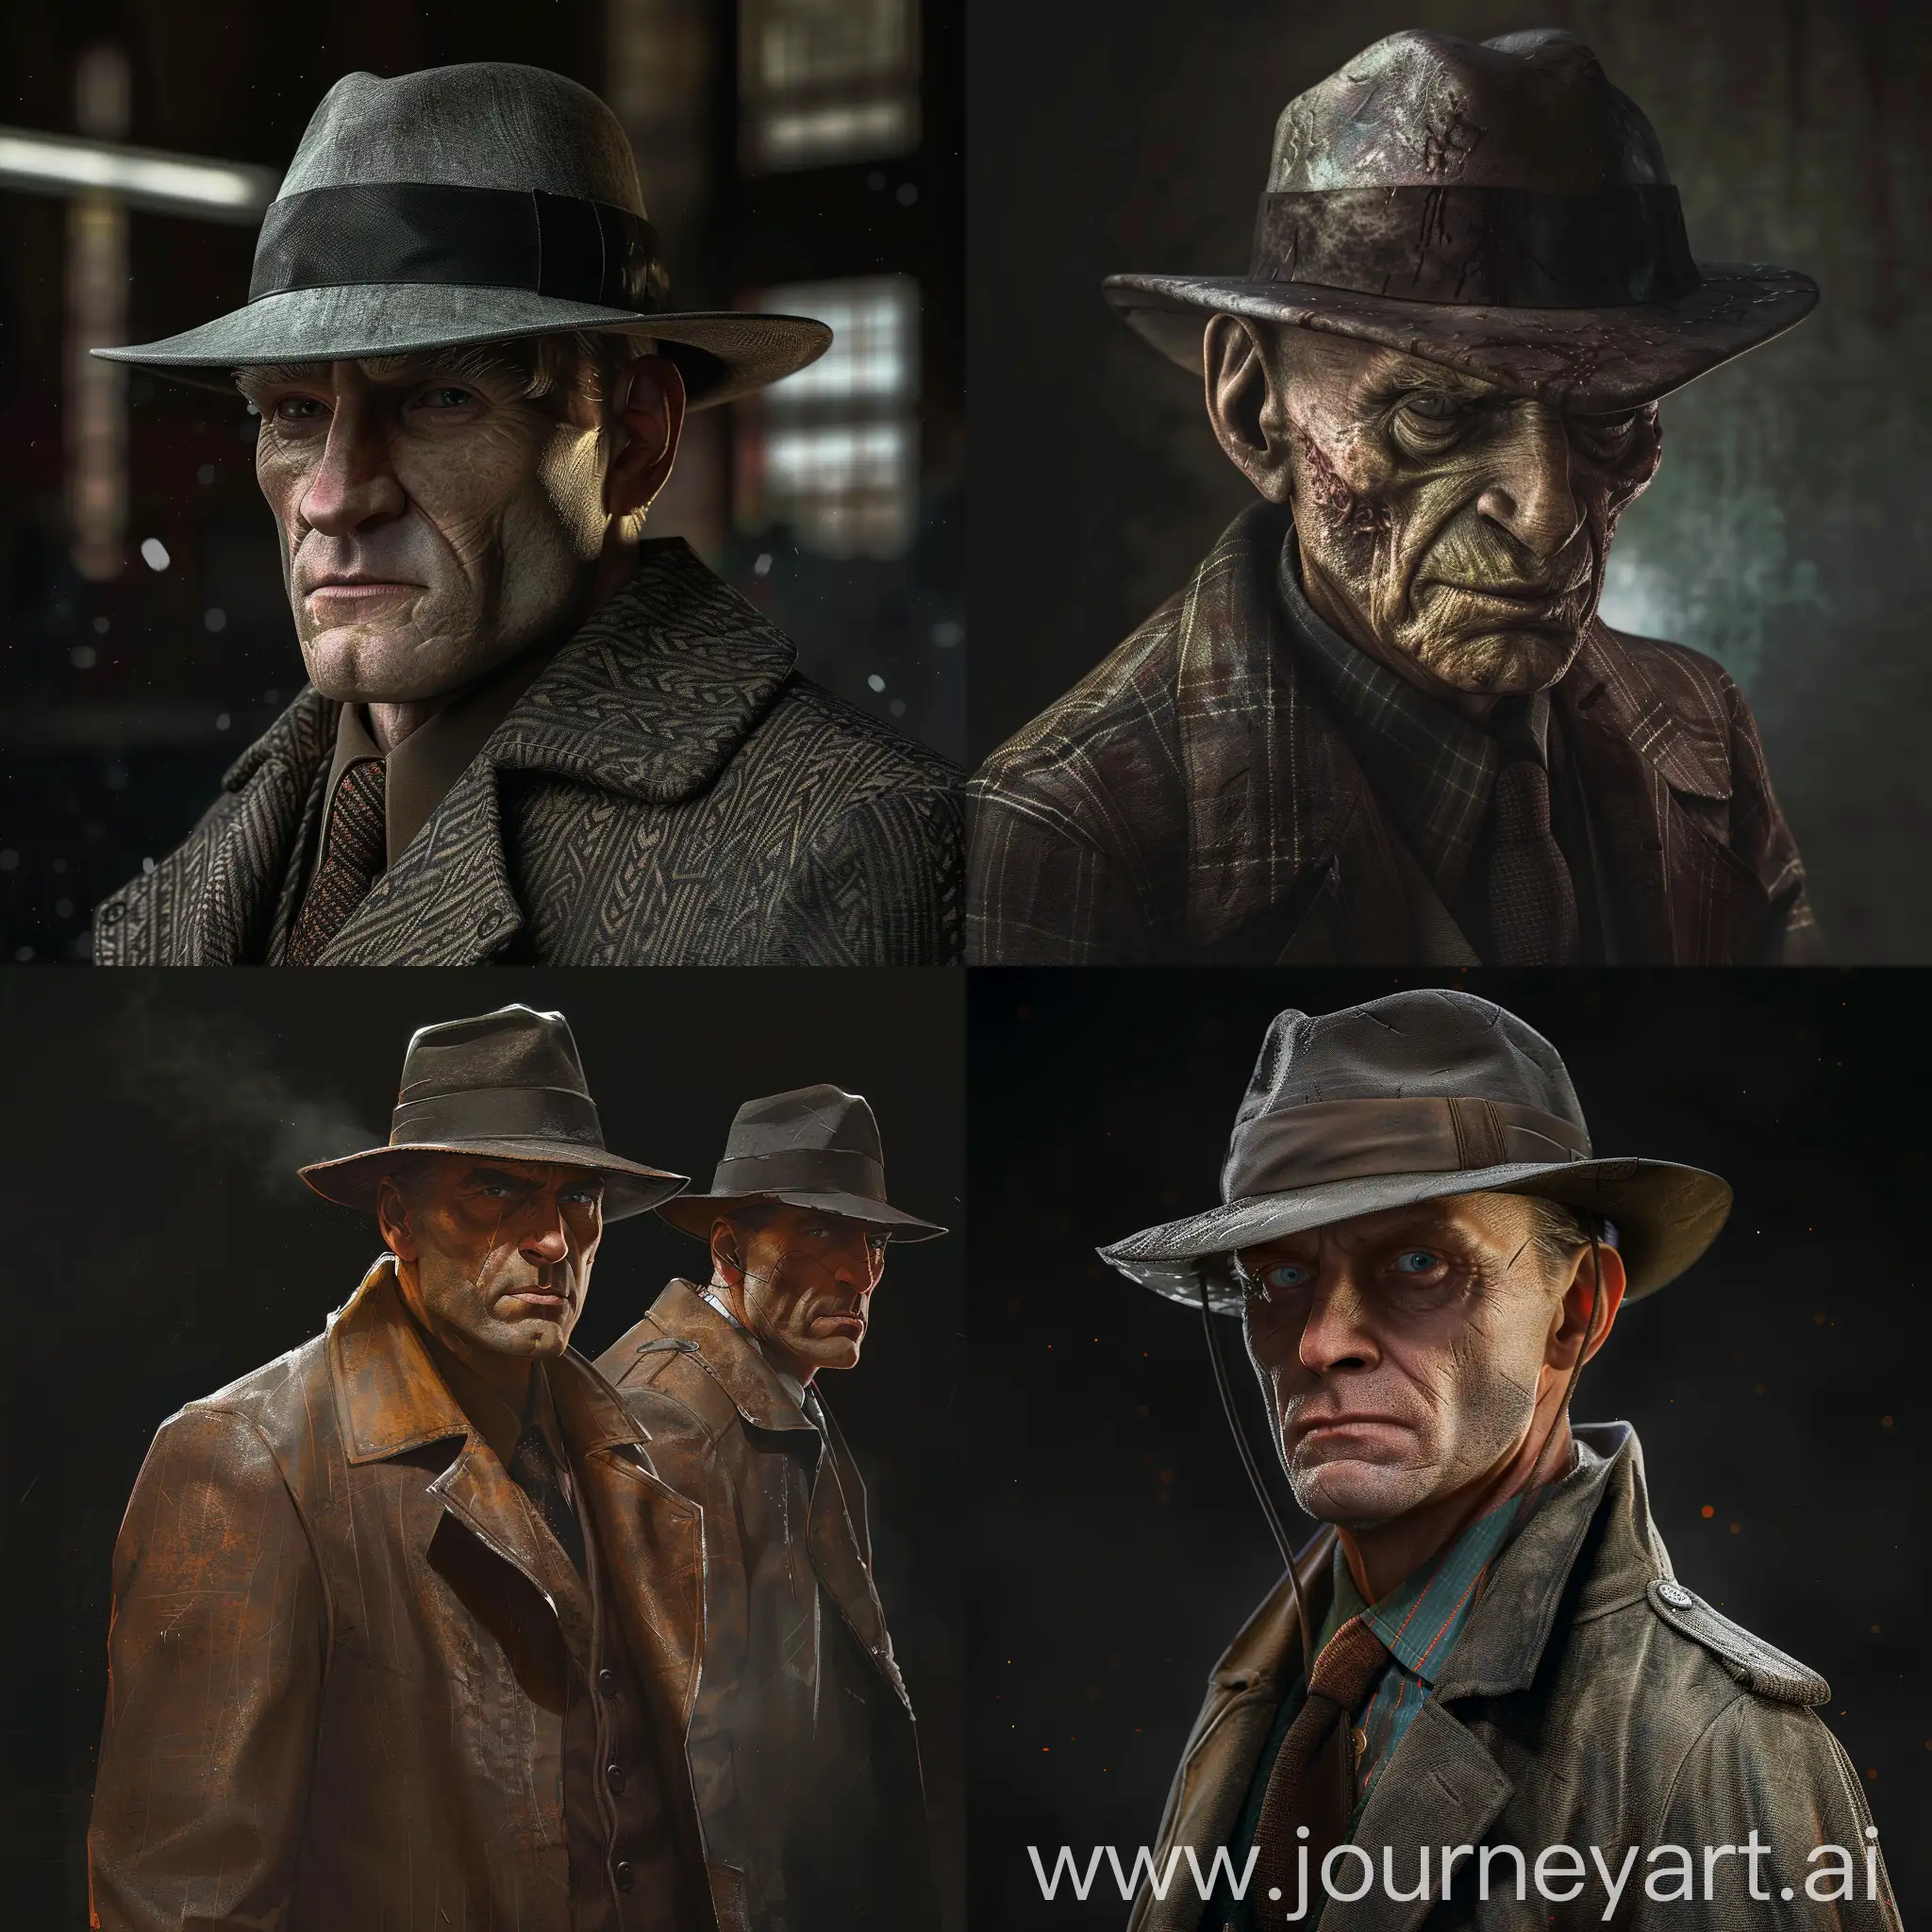 Mysterious-1920s-Bounty-Hunter-in-Call-of-Cthulhu-Fedora-Portrait